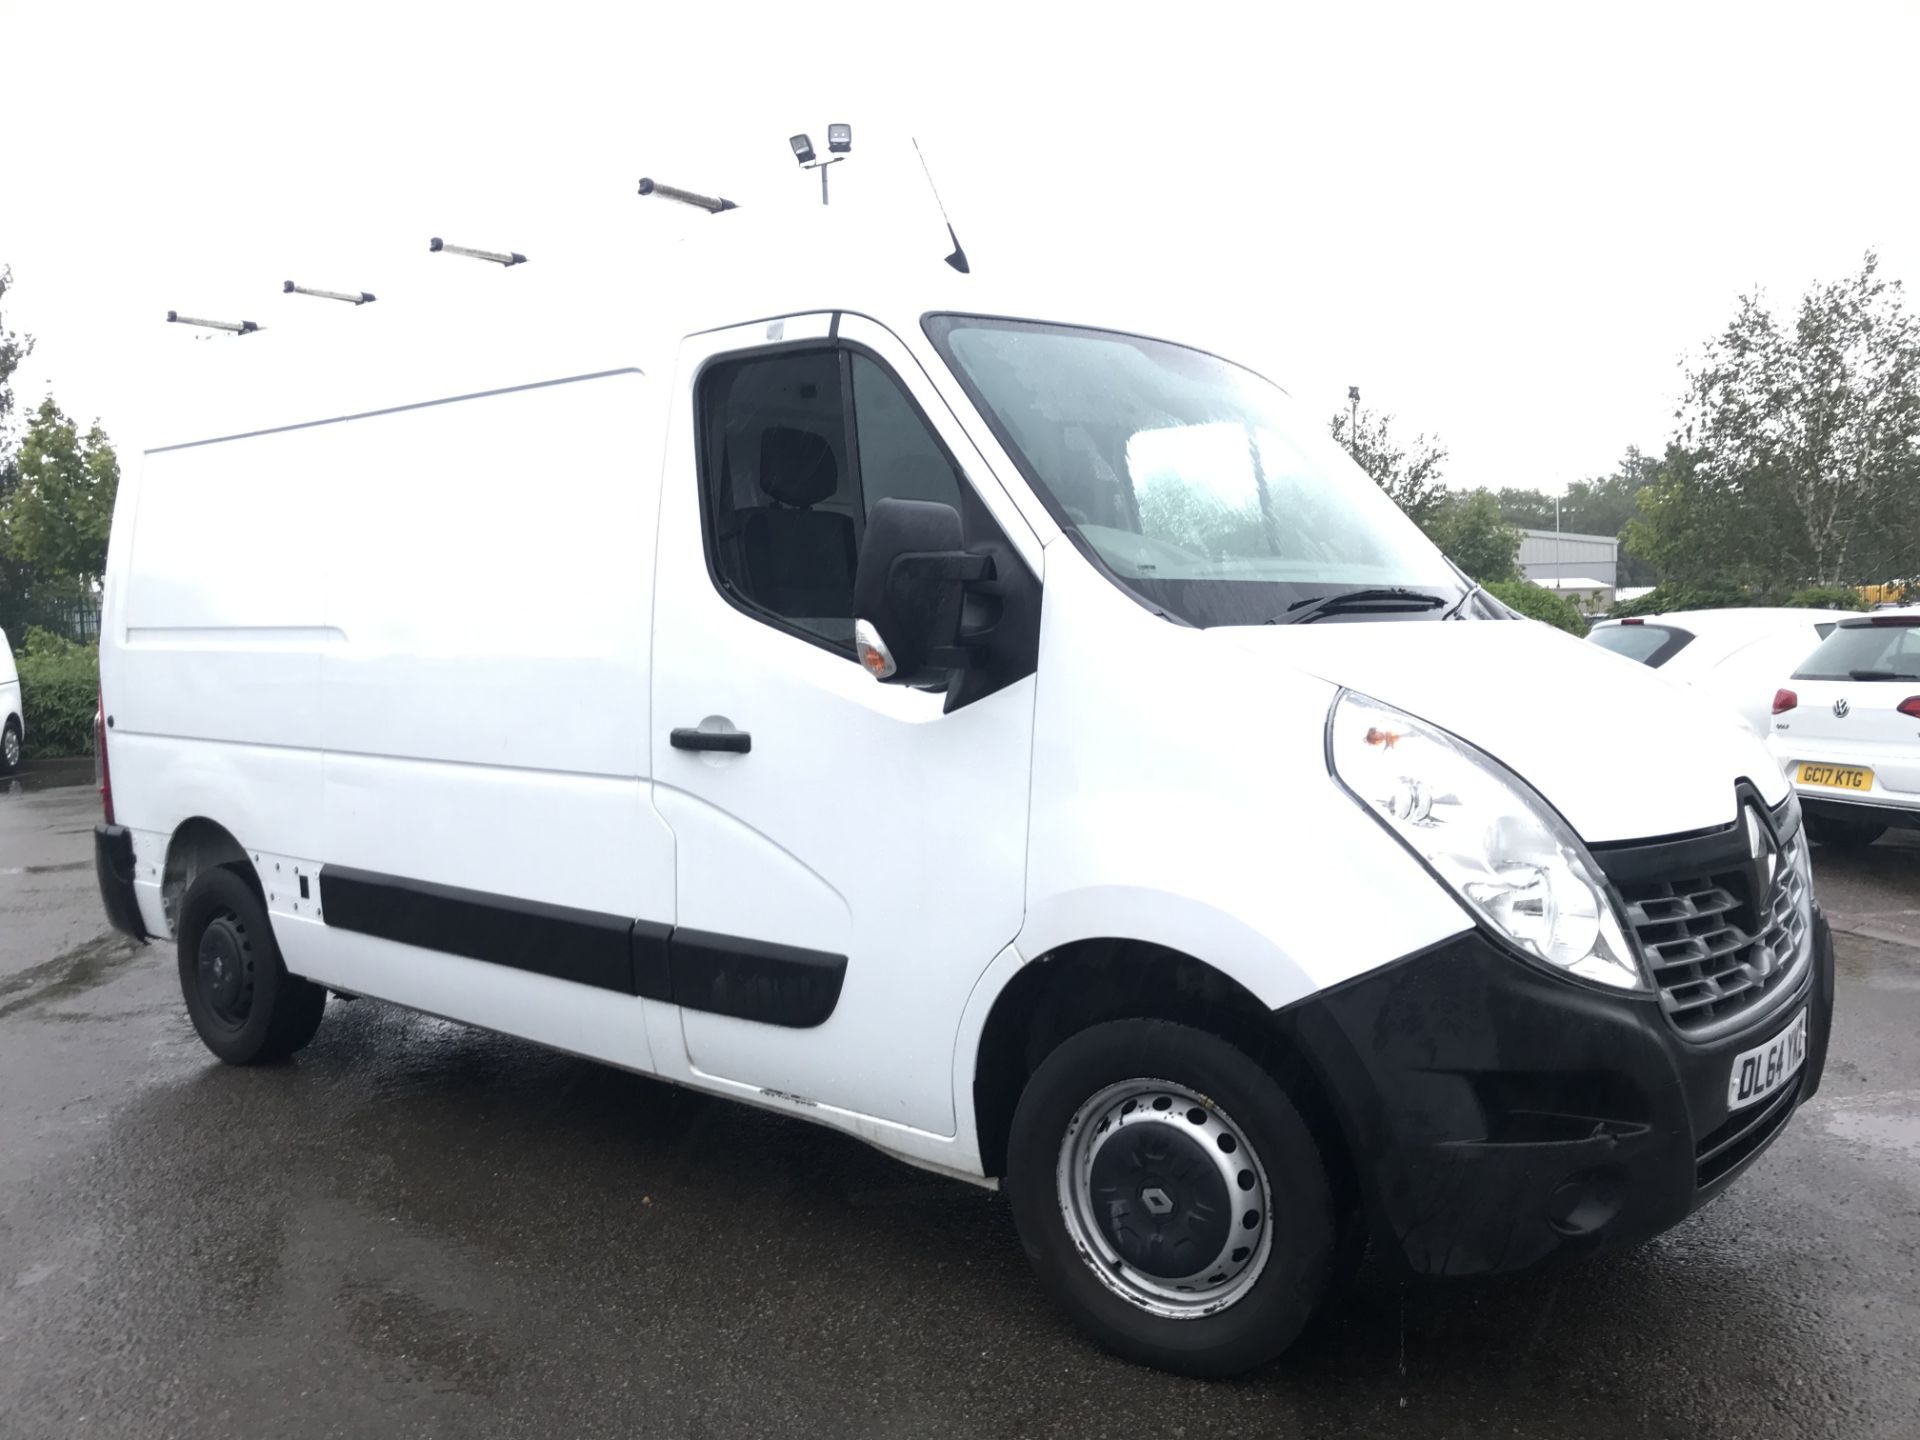 (ON SALE) RENAULT MASTER MM35 BUSINESS EDITION 2.3DCI (125) - ONLY 68K MILES! - 1 KEEPER -NEW MODEL - Image 2 of 11